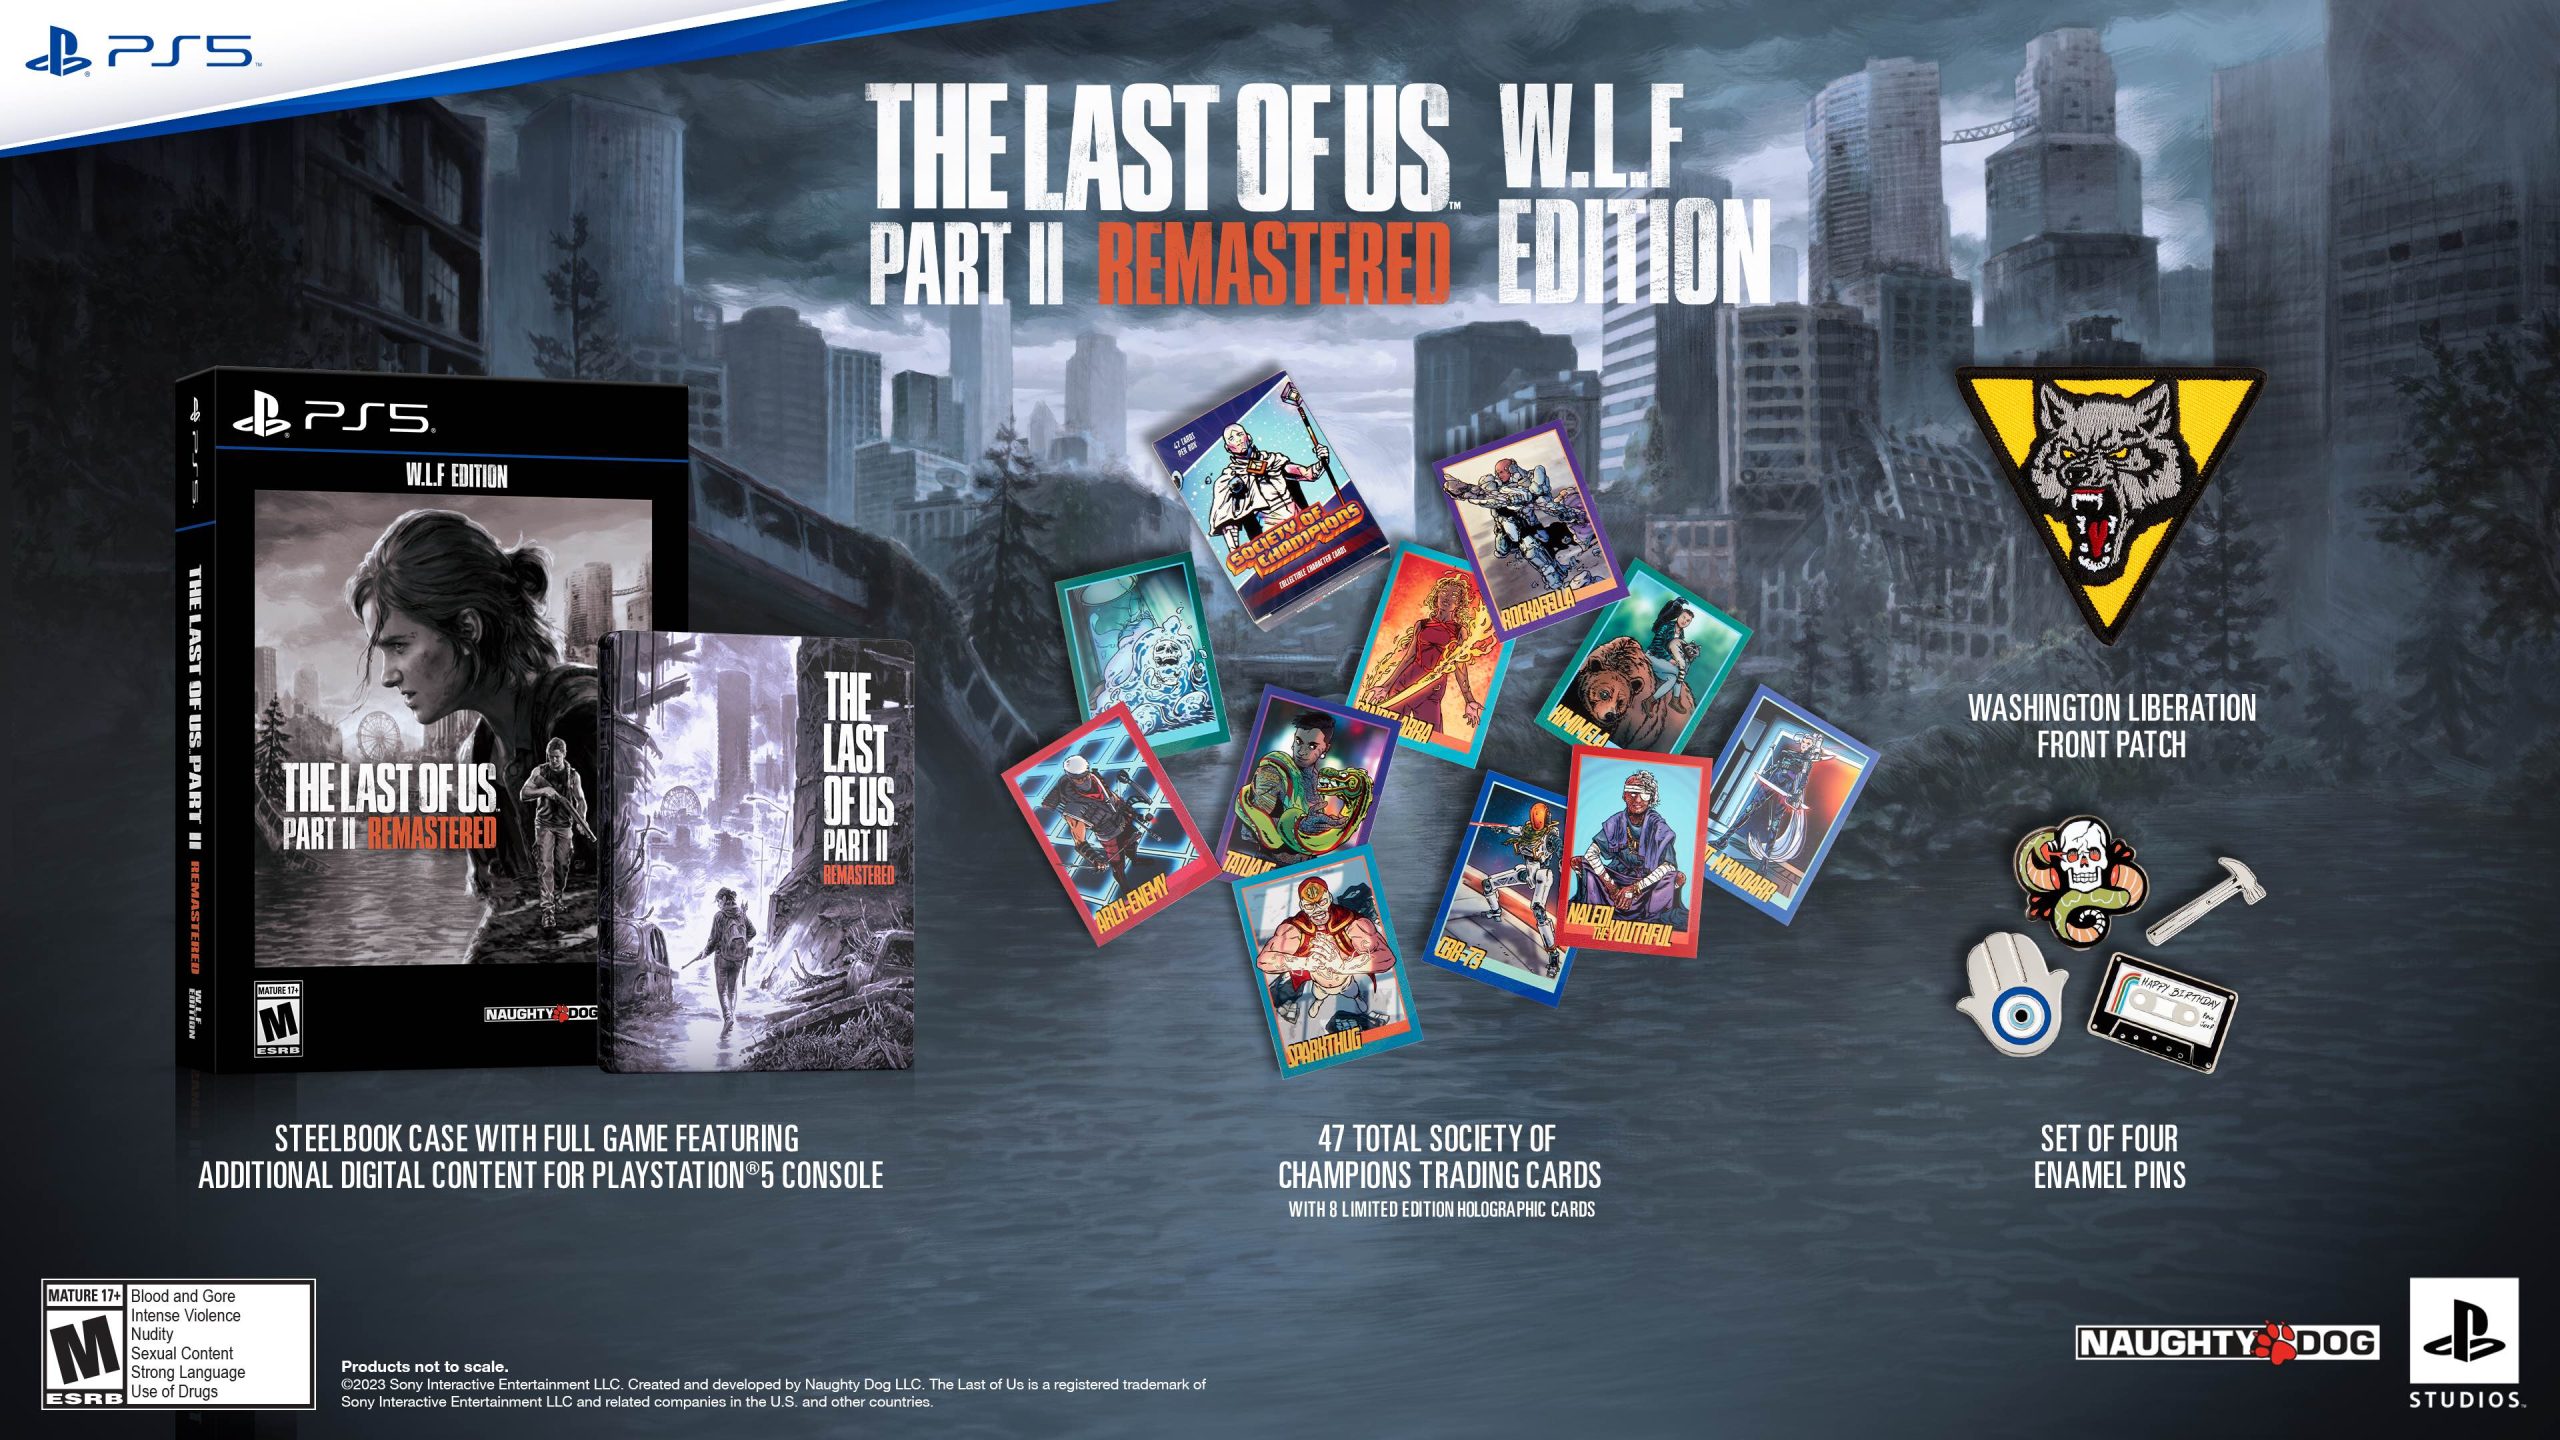 The Last of Us 2 Remastered is real, coming in January, and will